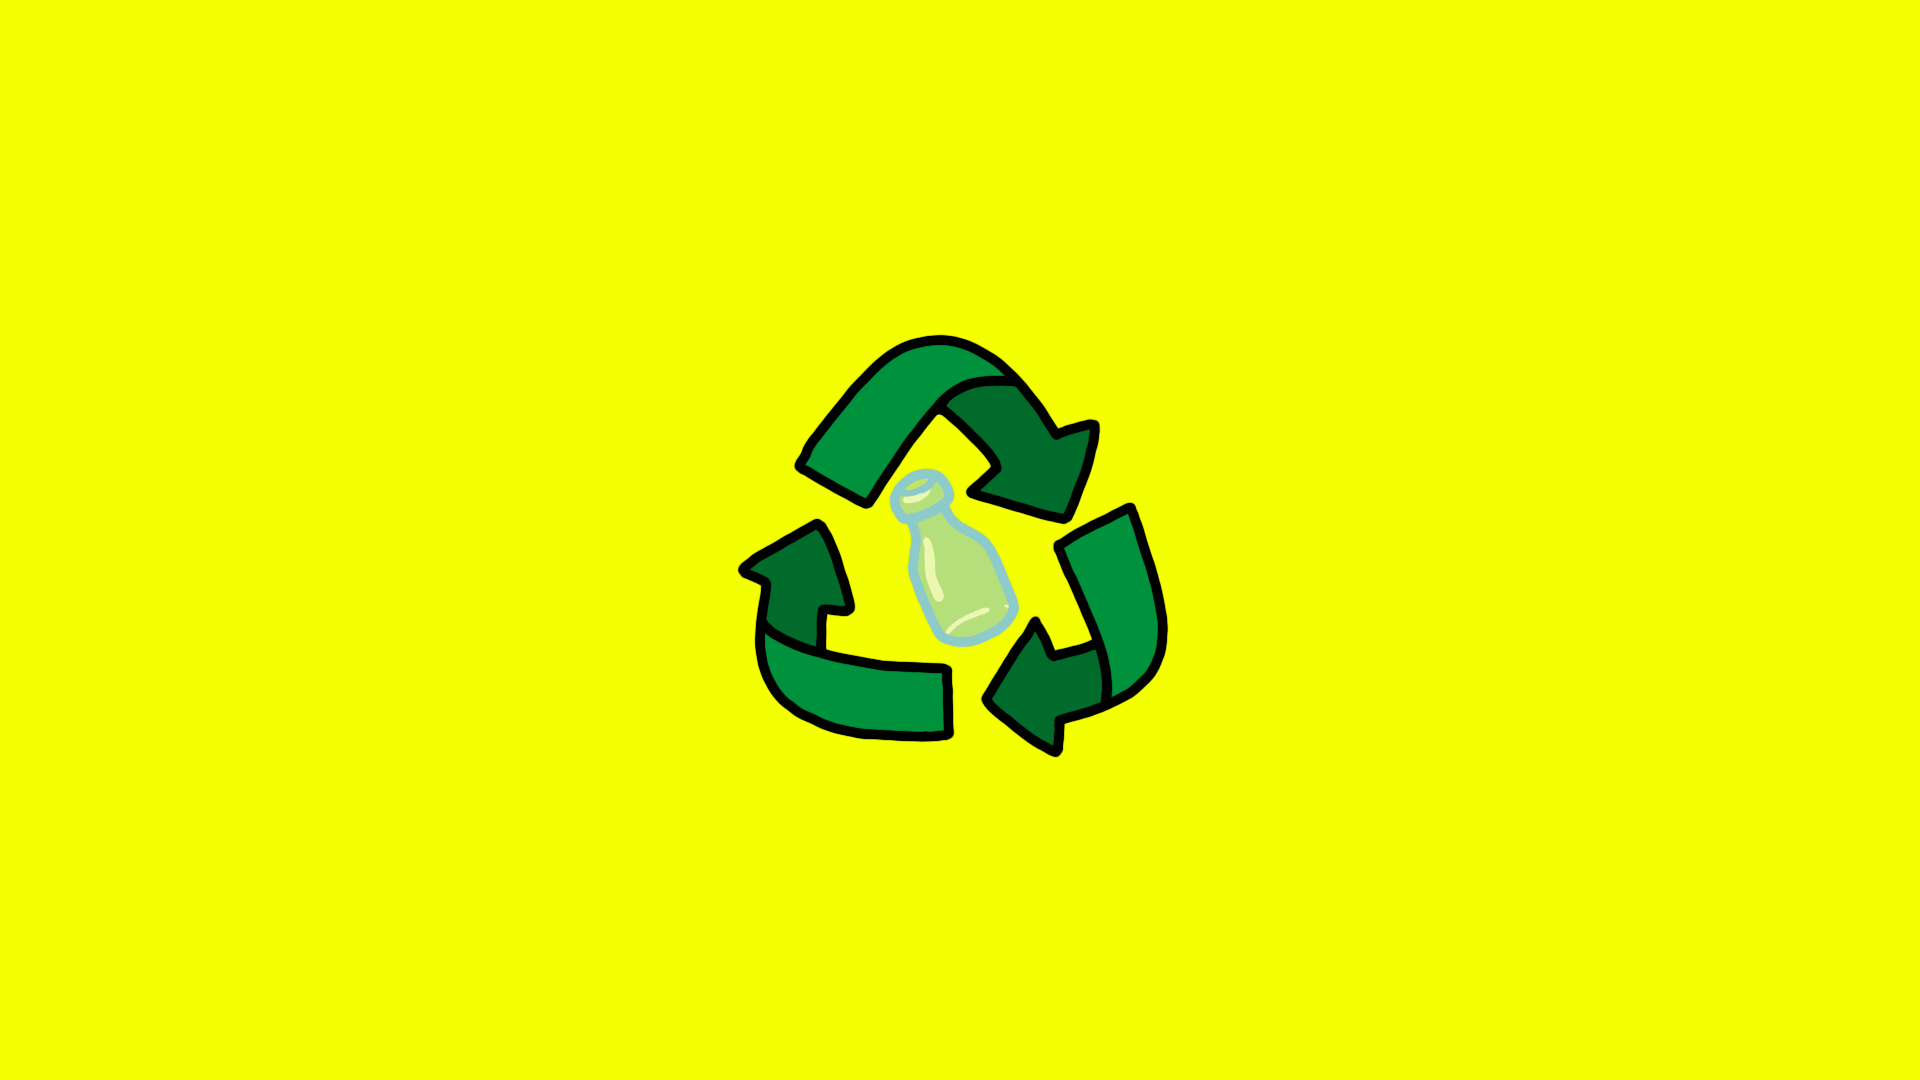 Icon for Green power